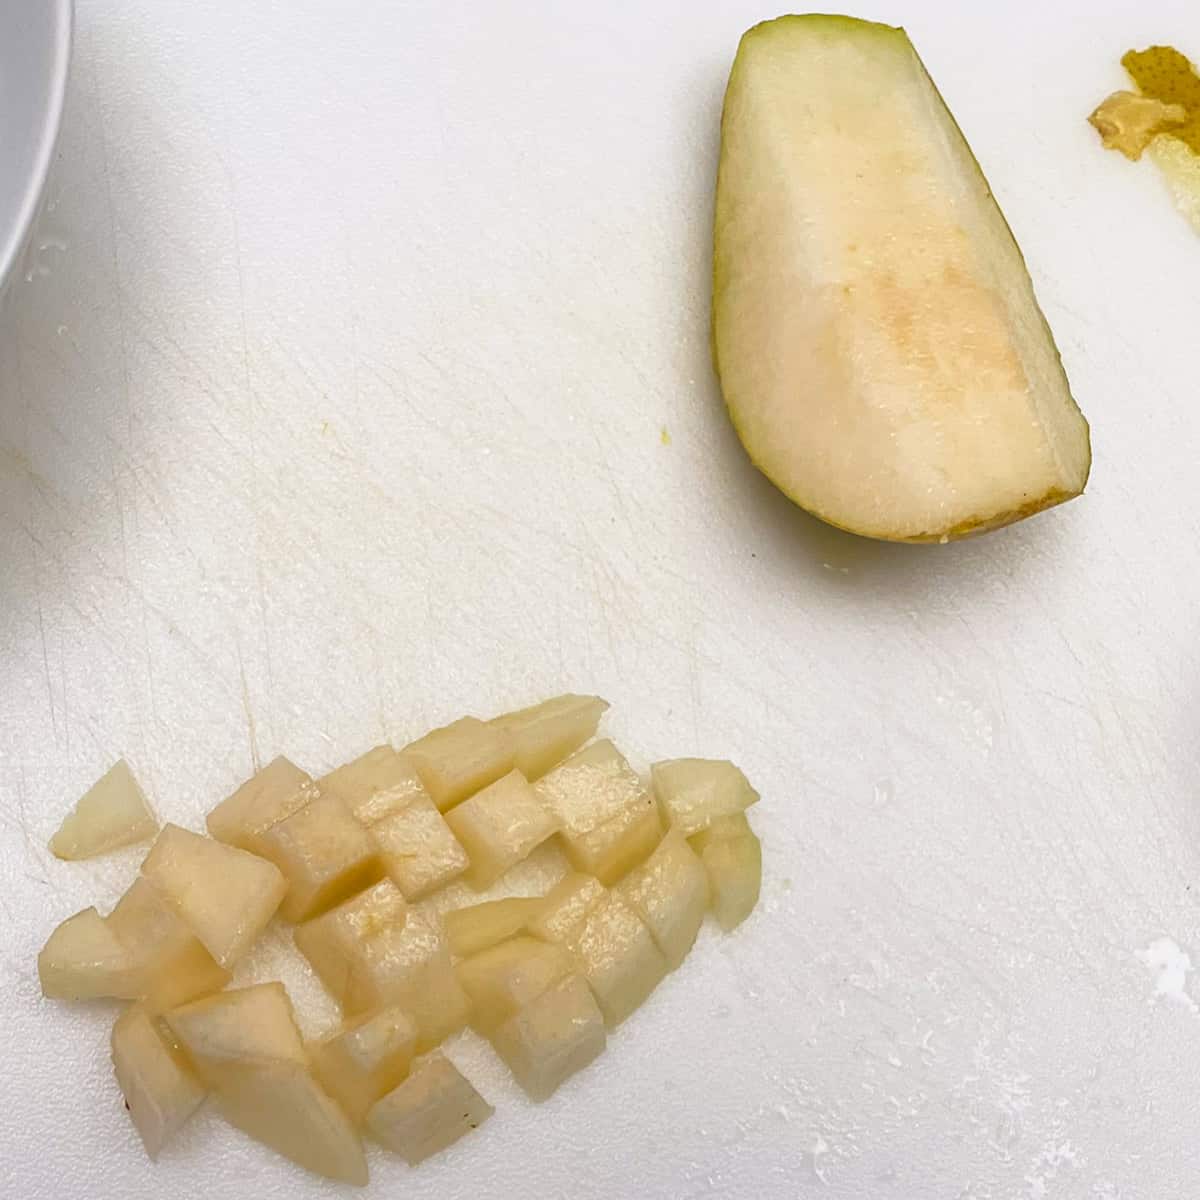 Pealed and cut up pear on a cutting board.